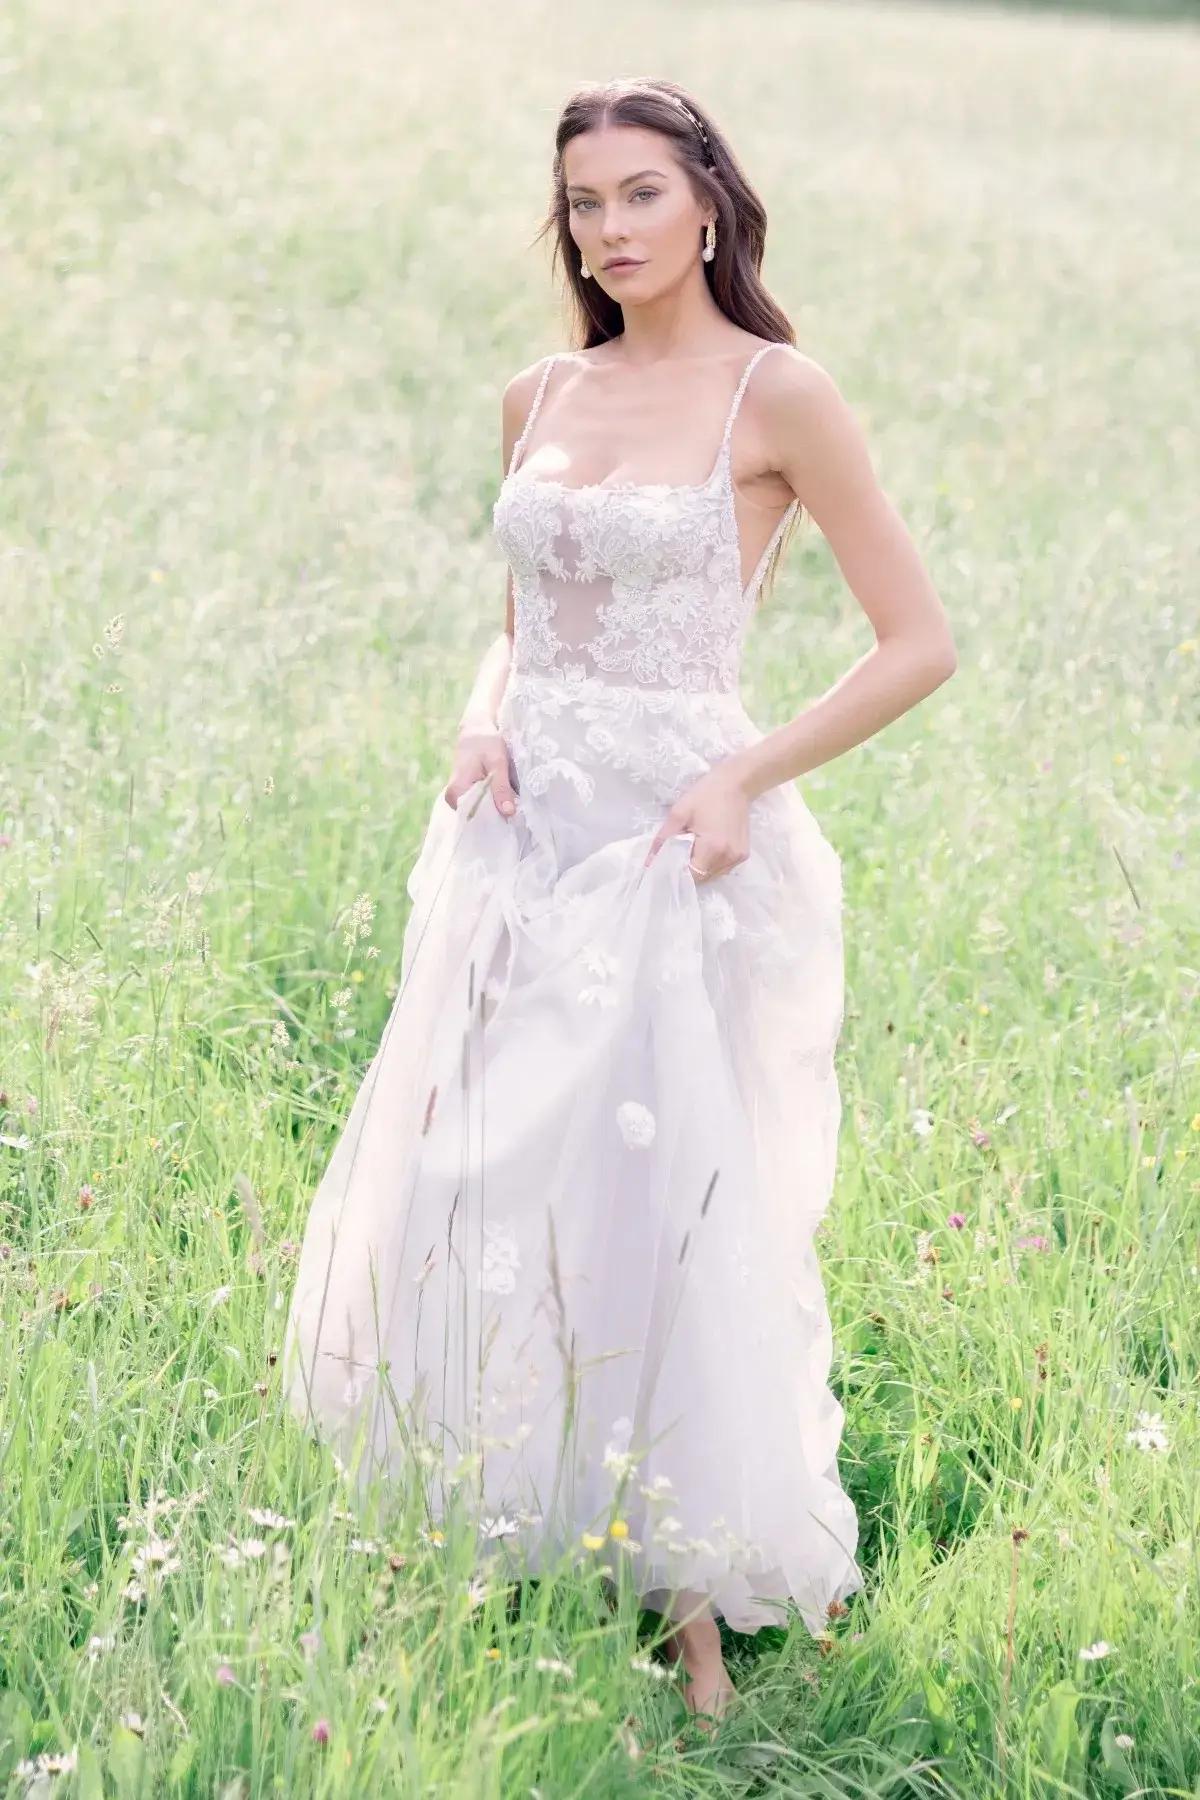 Chic and Sophisticated: Classic Summer Wedding Style Ideas Image